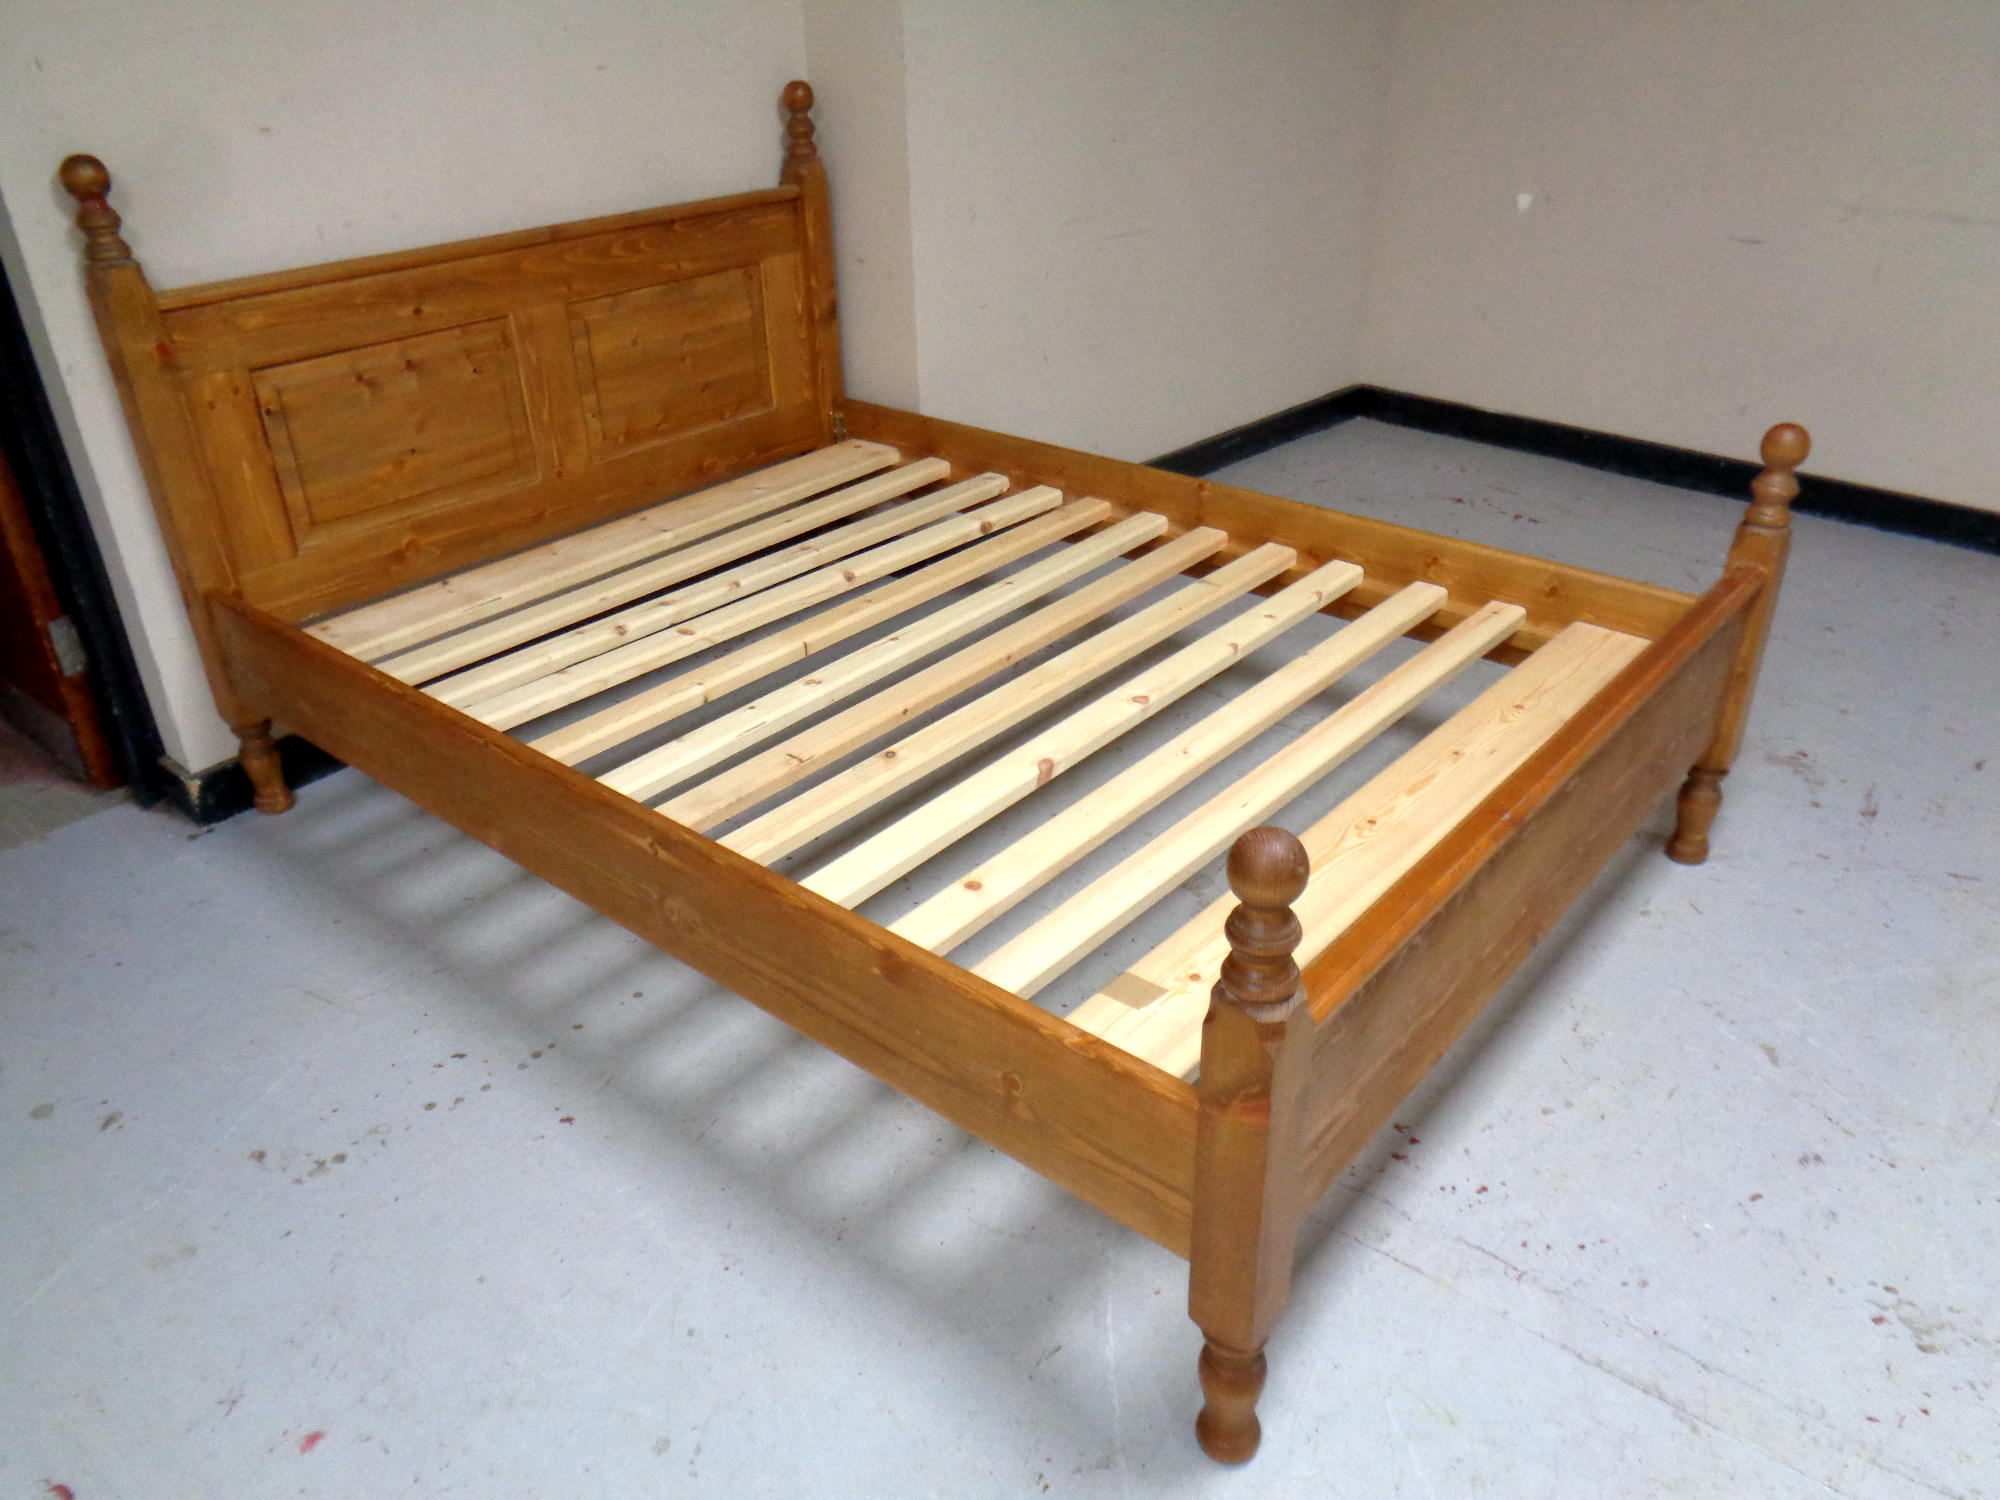 A 4'6 pine bed frame